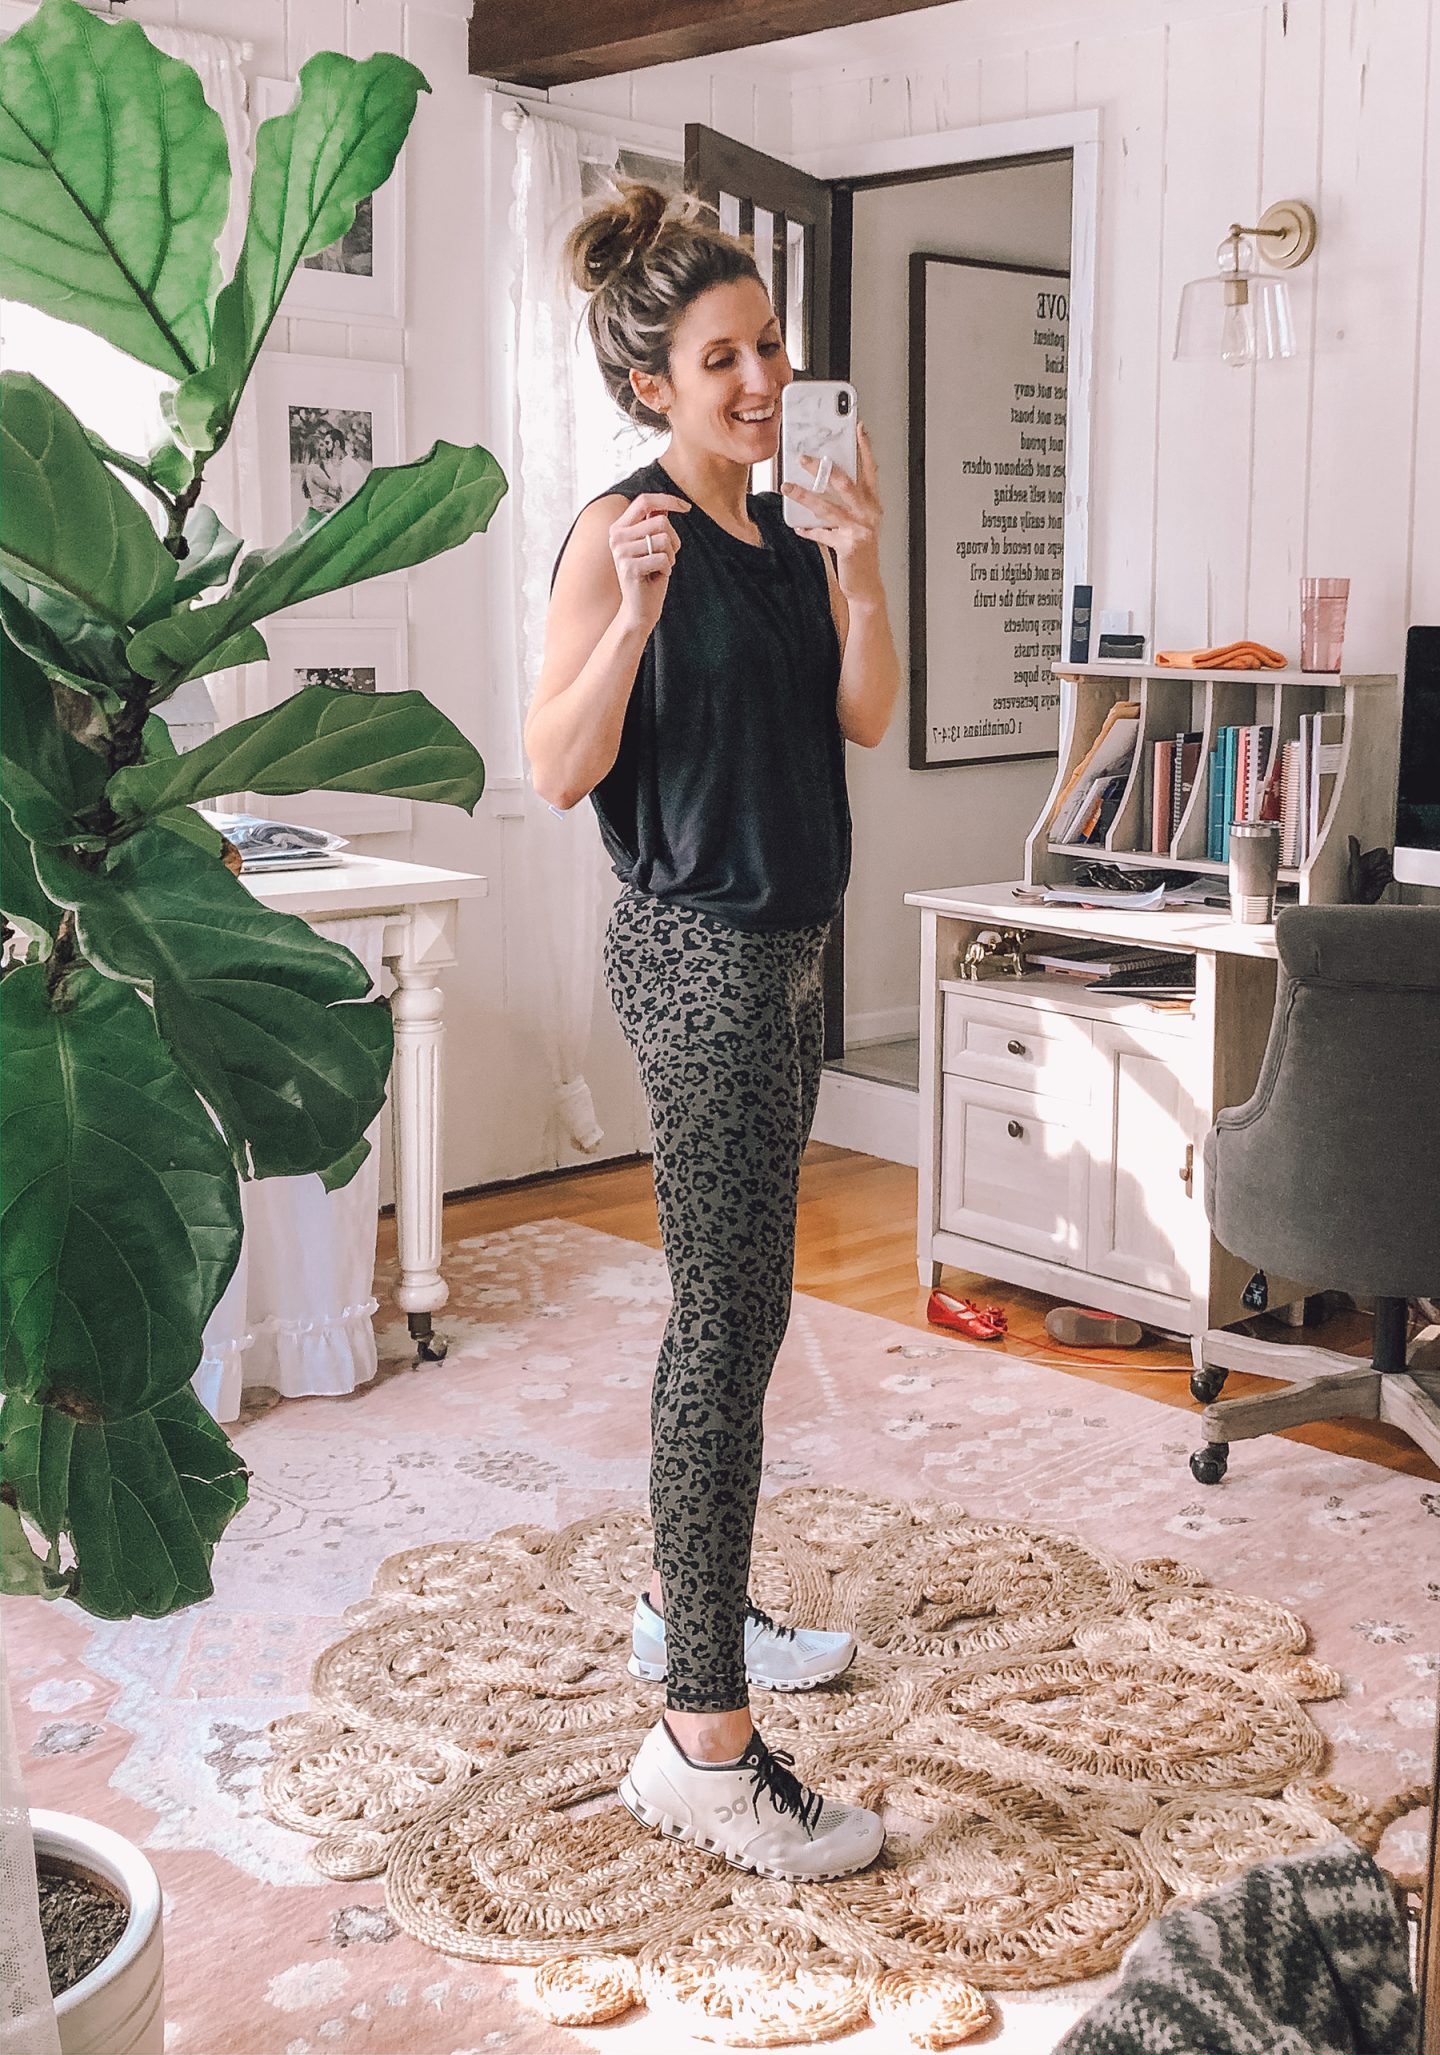 Leggings for Women - My Review of Six Pairs from  